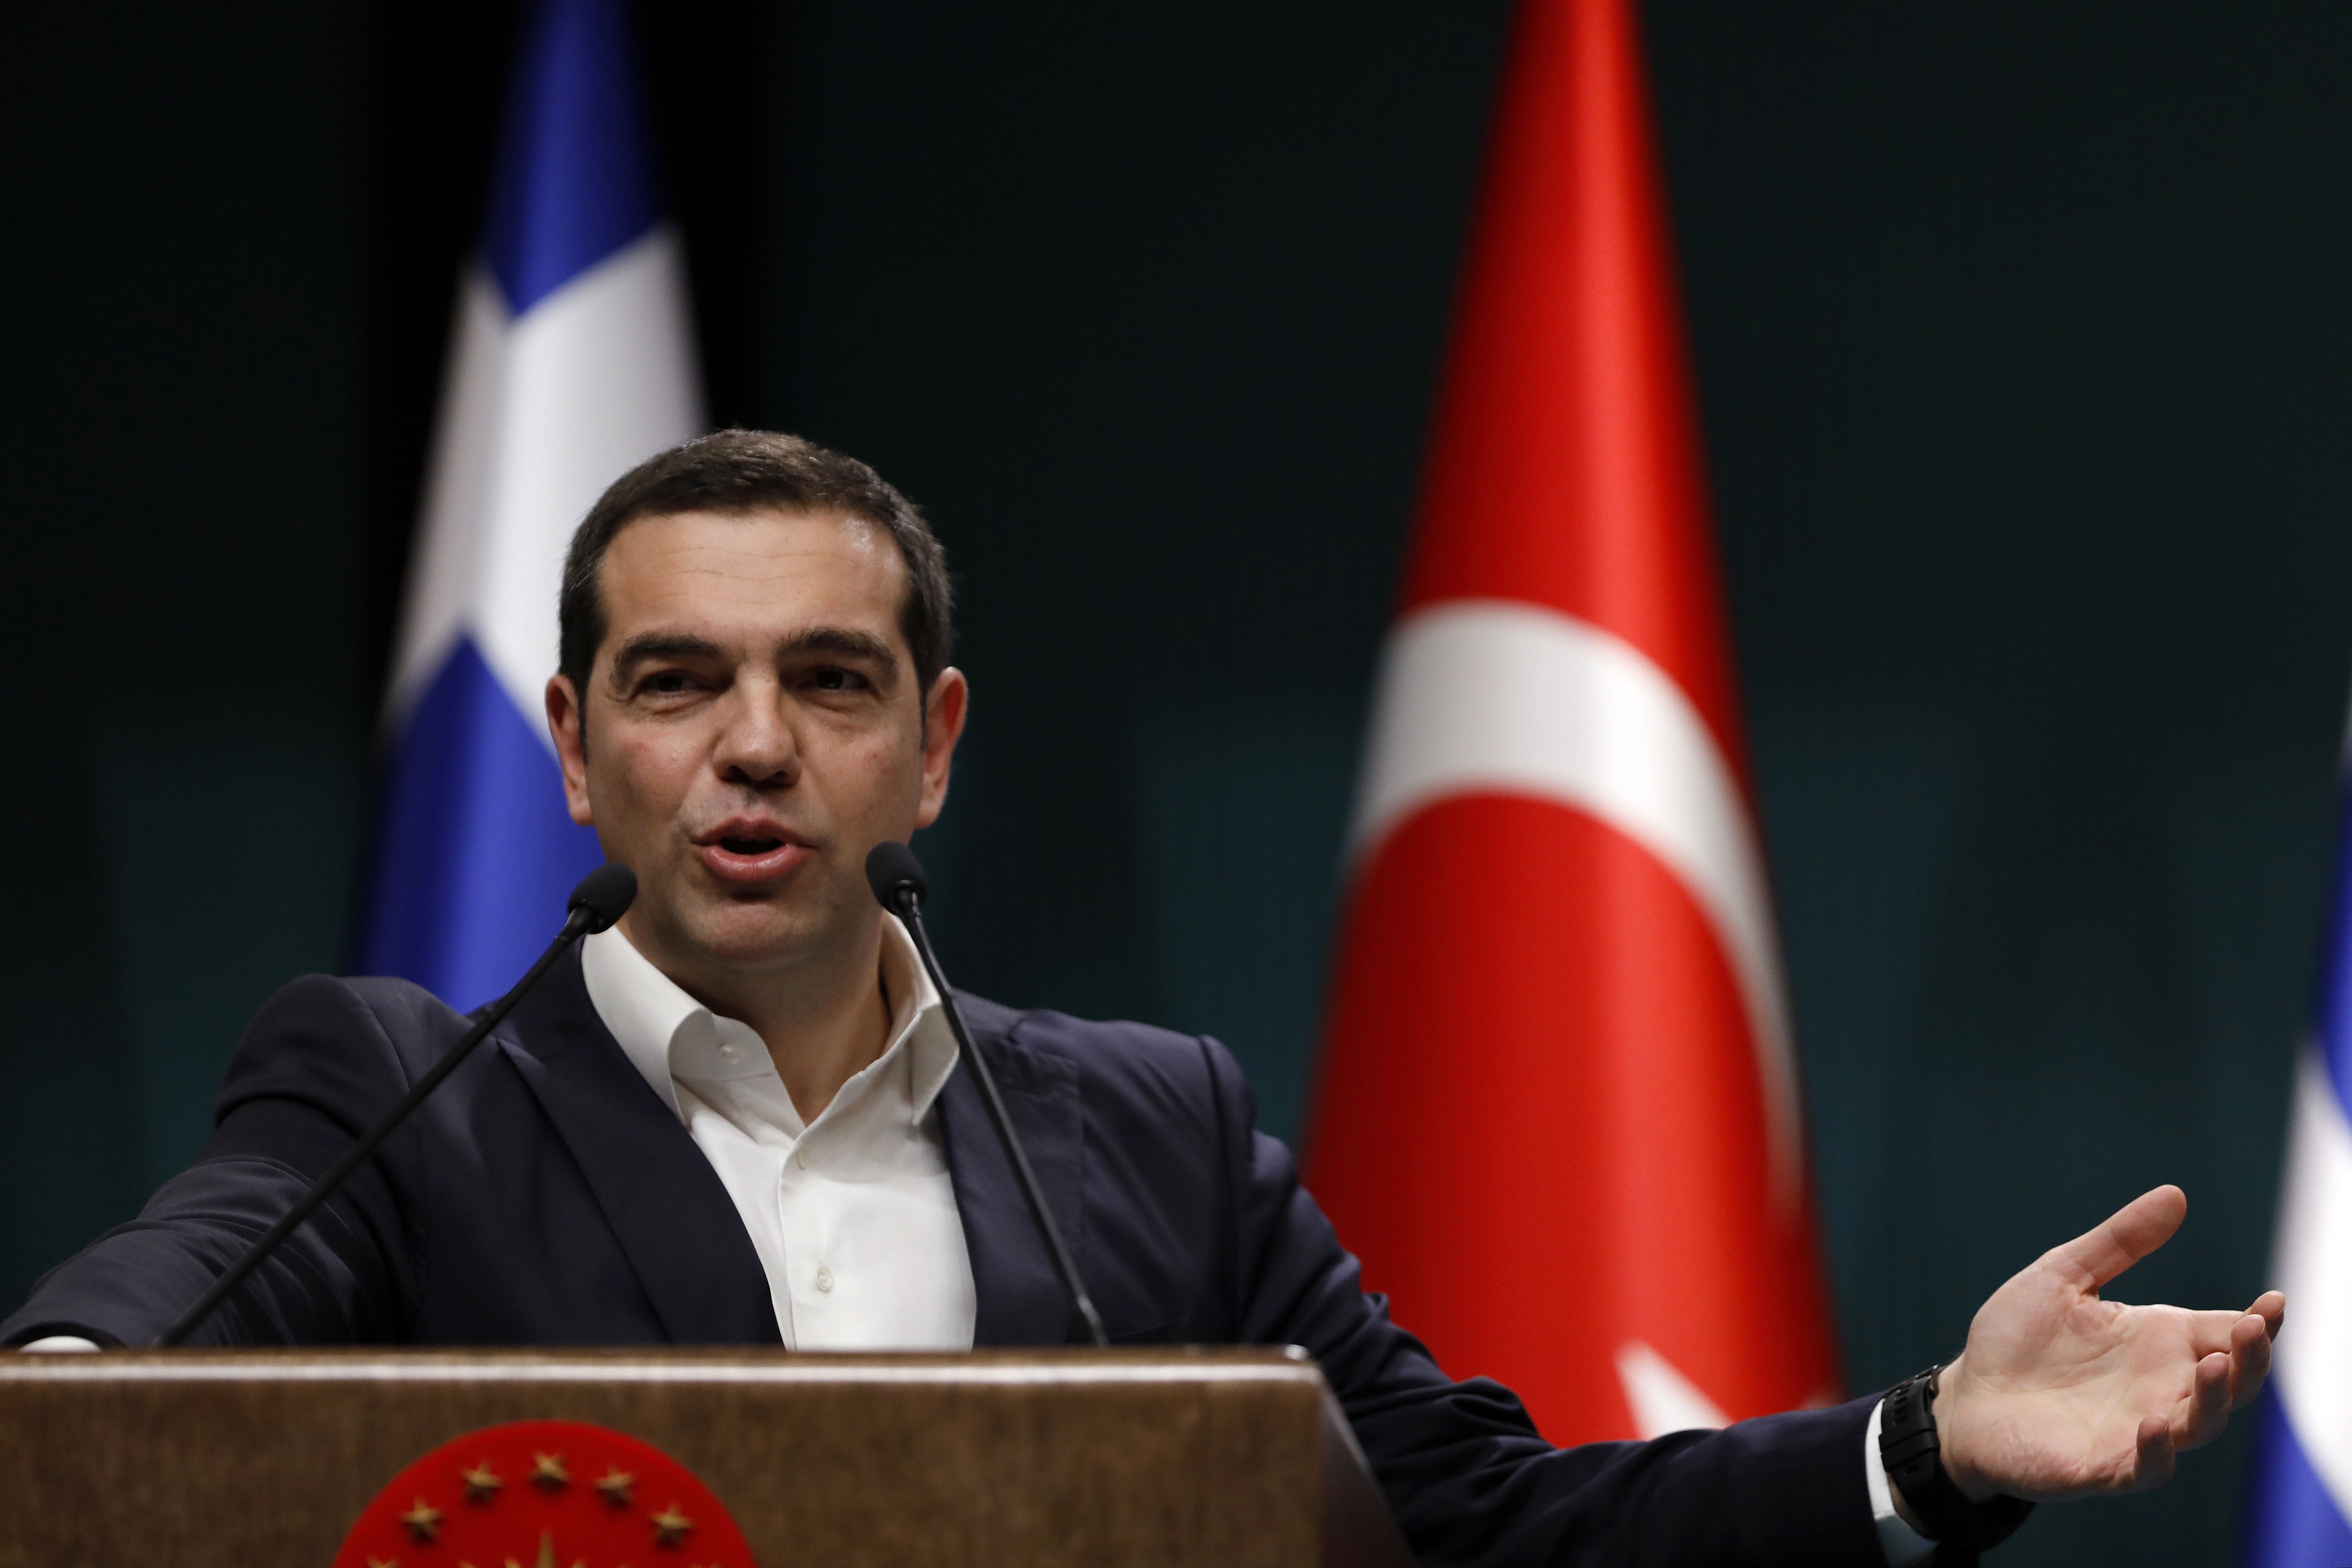 Greece's Prime Minister Alexis Tsipras speaks during a press conference with Turkey's President Recep Tayyip Erdogan at the Presidential Palace in Ankara, Tuesday, Feb. 5, 2019. Tsipras and Erdogan are set to discuss an array of subjects that have strained relations between the two NATO allies, including territorial disputes in the Aegean Sea and gas exploration in the eastern Mediterranean. (AP Photo/Burhan Ozbilici)